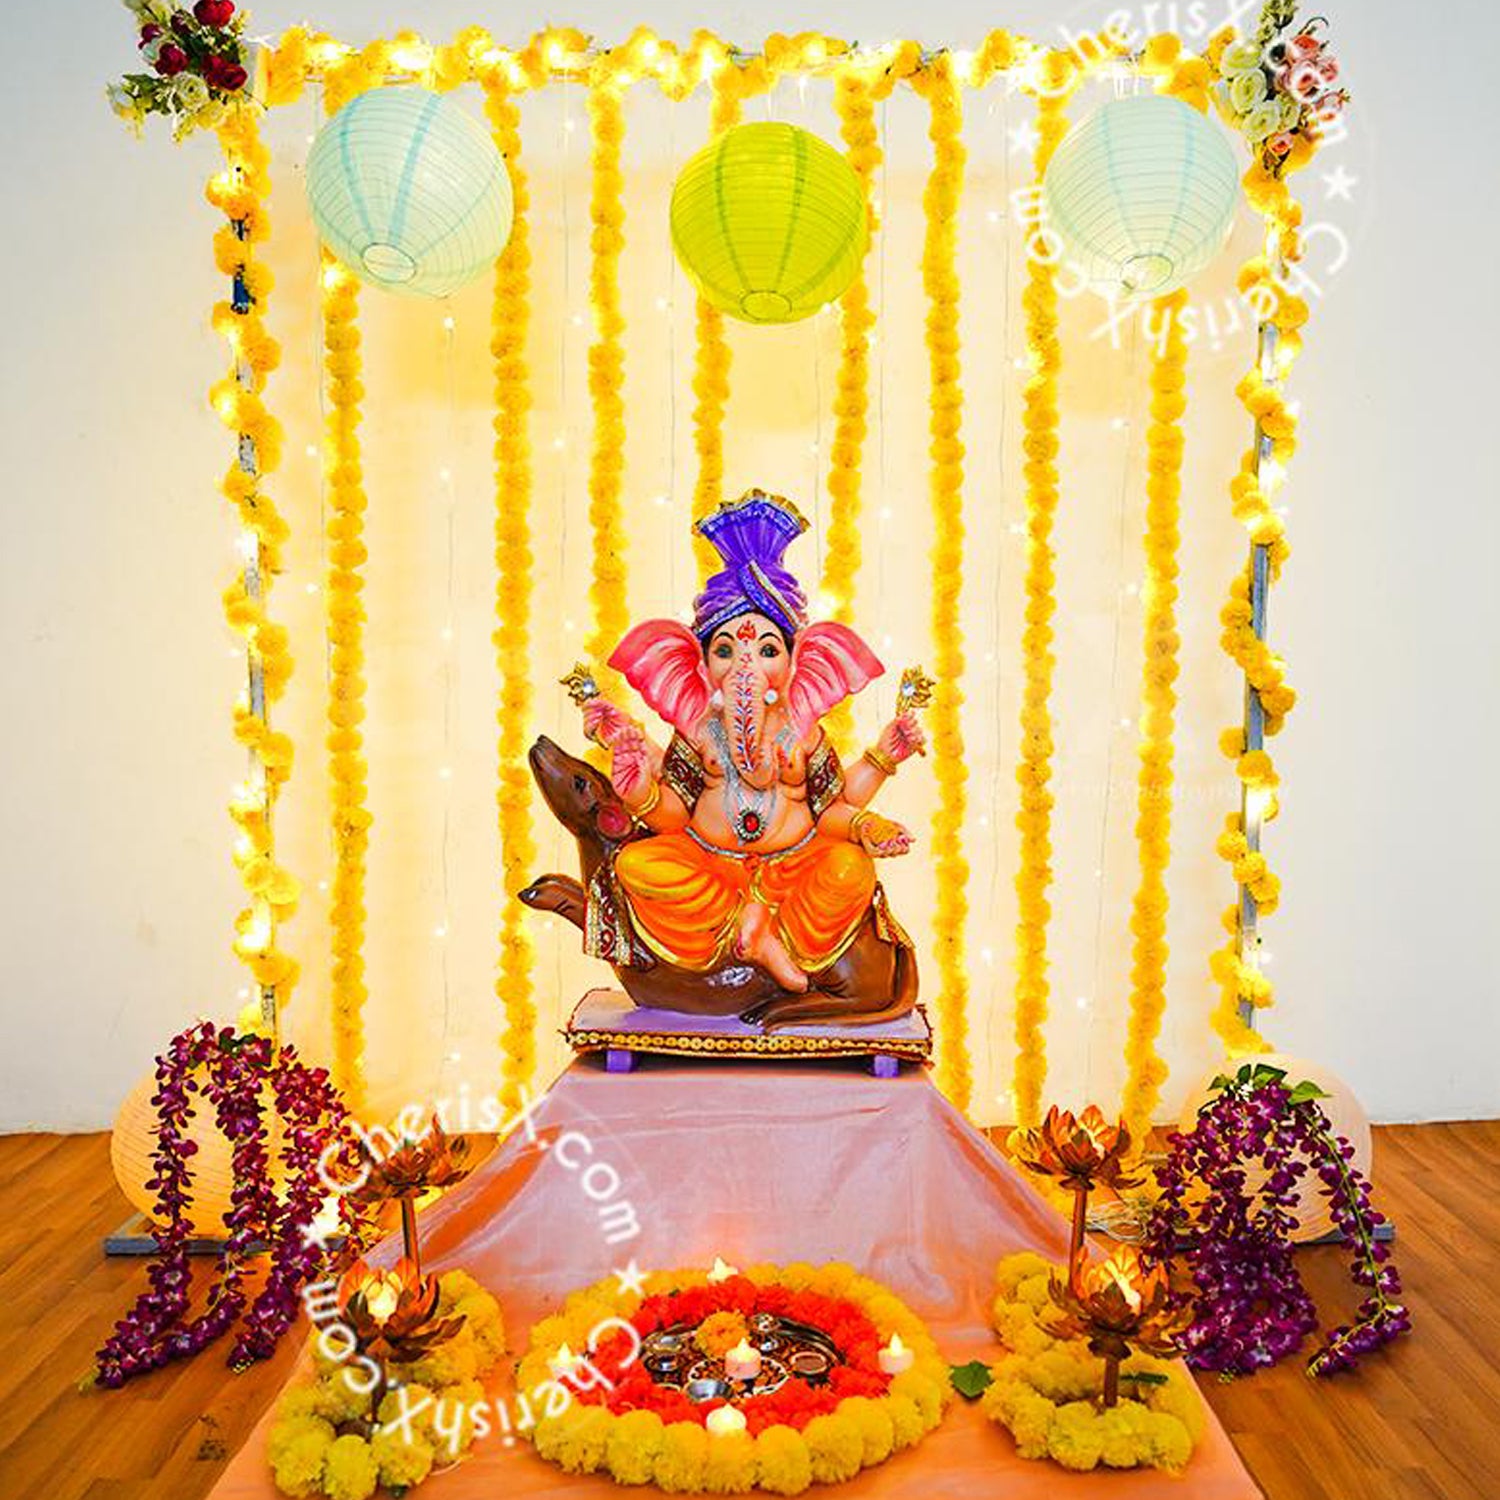 Celebrate Diwali with Festive Flower and Lantern Decoration at home